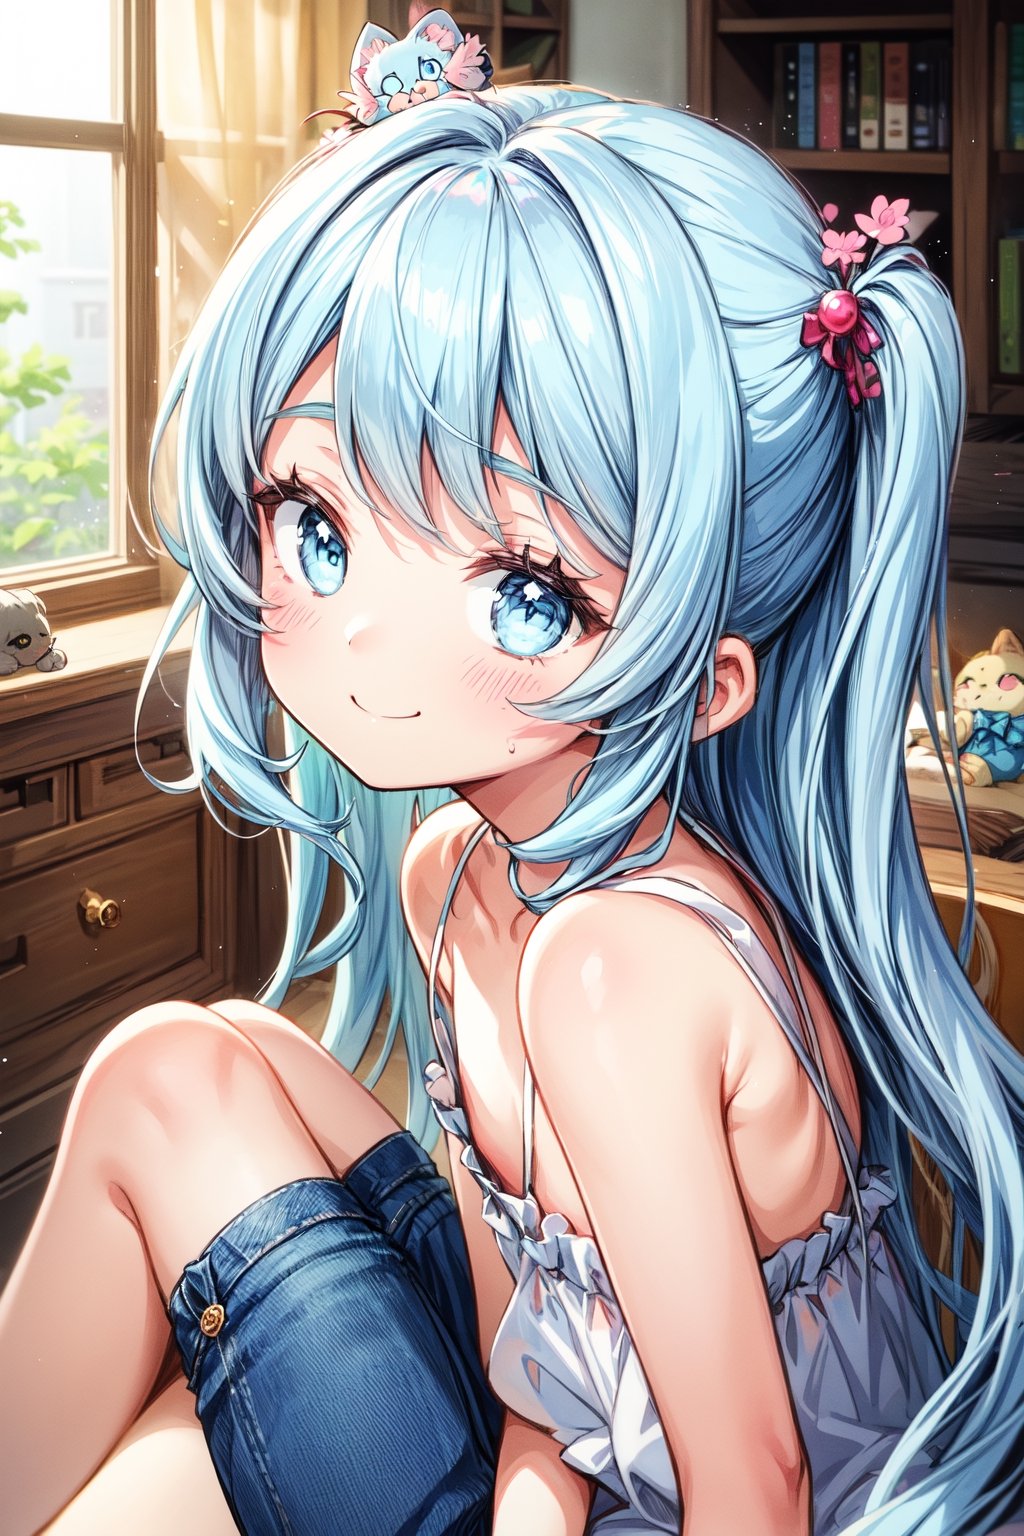 masterpiece, best quality, extremely detailed, (illustration, official art:1.1), 1 girl ,(((( light blue long hair)))), ,(((( light blue long hair)))),light blue hair, ,10 years old, long hair ((blush)) , cute face, big eyes, masterpiece, best quality,(((((a very delicate and beautiful girl))))),Amazing,beautiful detailed eyes,blunt bangs((((little delicate girl)))),tareme(true beautiful:1.2), sense of depth,dynamic angle,,,, affectionate smile, (true beautiful:1.2),,(tiny 1girl model:1.2),)(flat chest), (((masterpiece))), (SFW:1.5),best quality, high resolution, distinct image, (many (detailed) little cats) and one girl:1.3), wearing Jeans, focus on cat, little (detailed) 、cats around girl,background is back alley, detasiled sunlight, sitting, girl looking viewer, side view, (cats looking viewer:1.2), sitting on the floor grasping knees, (happy:1.3) , (kitten)
